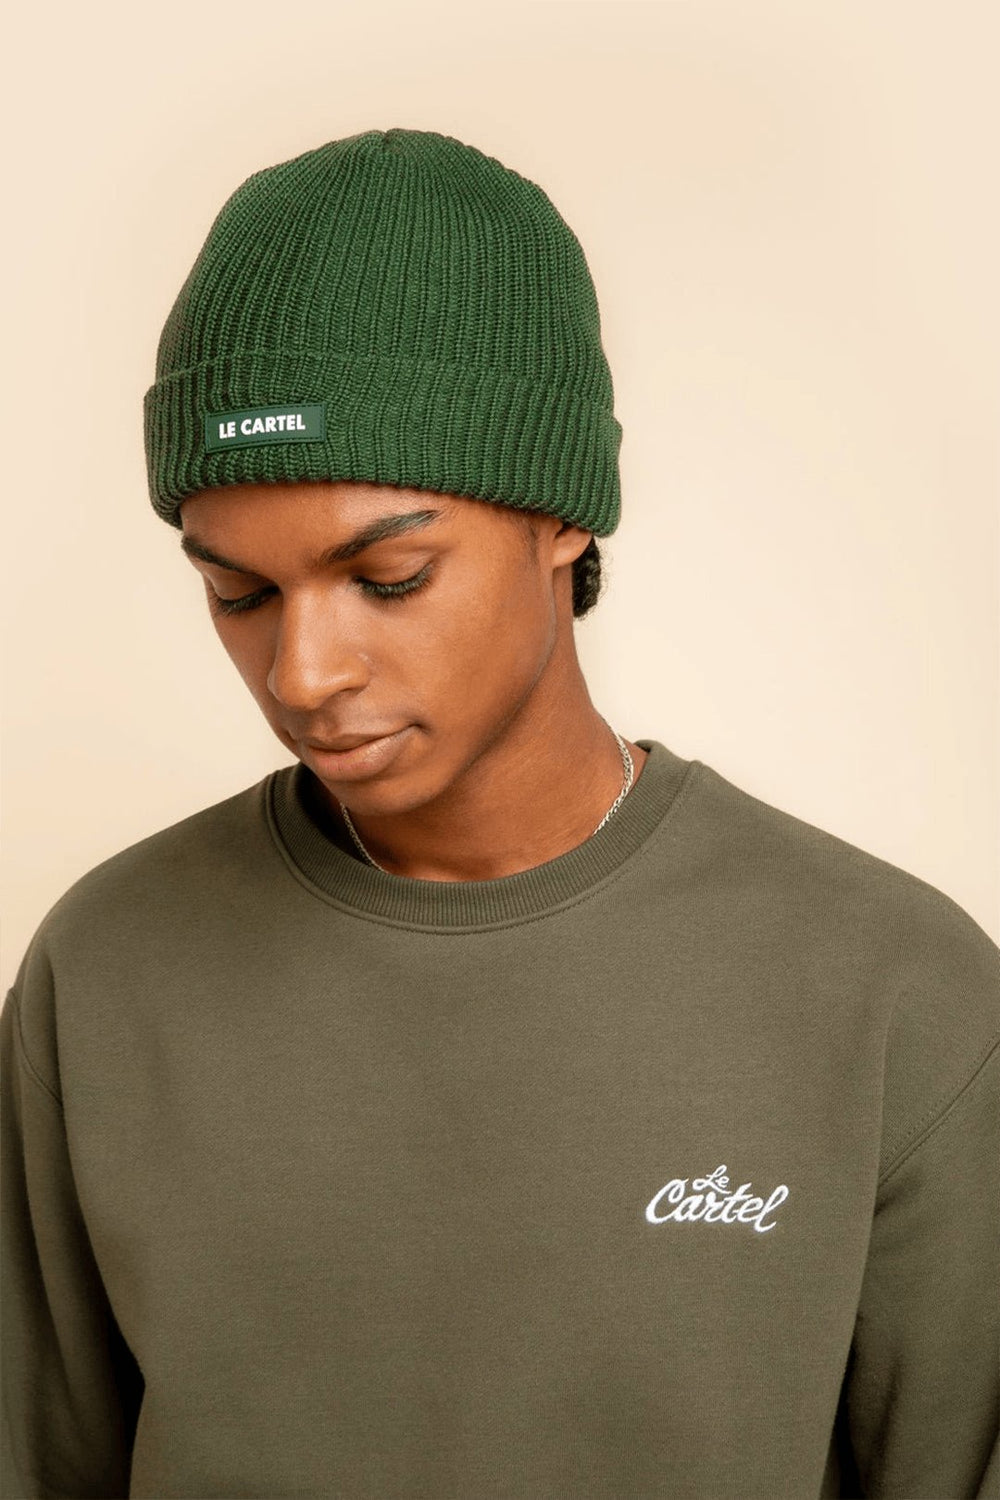 CHUNKY・Tuque grosse maille・Vert forêt - Le Cartel